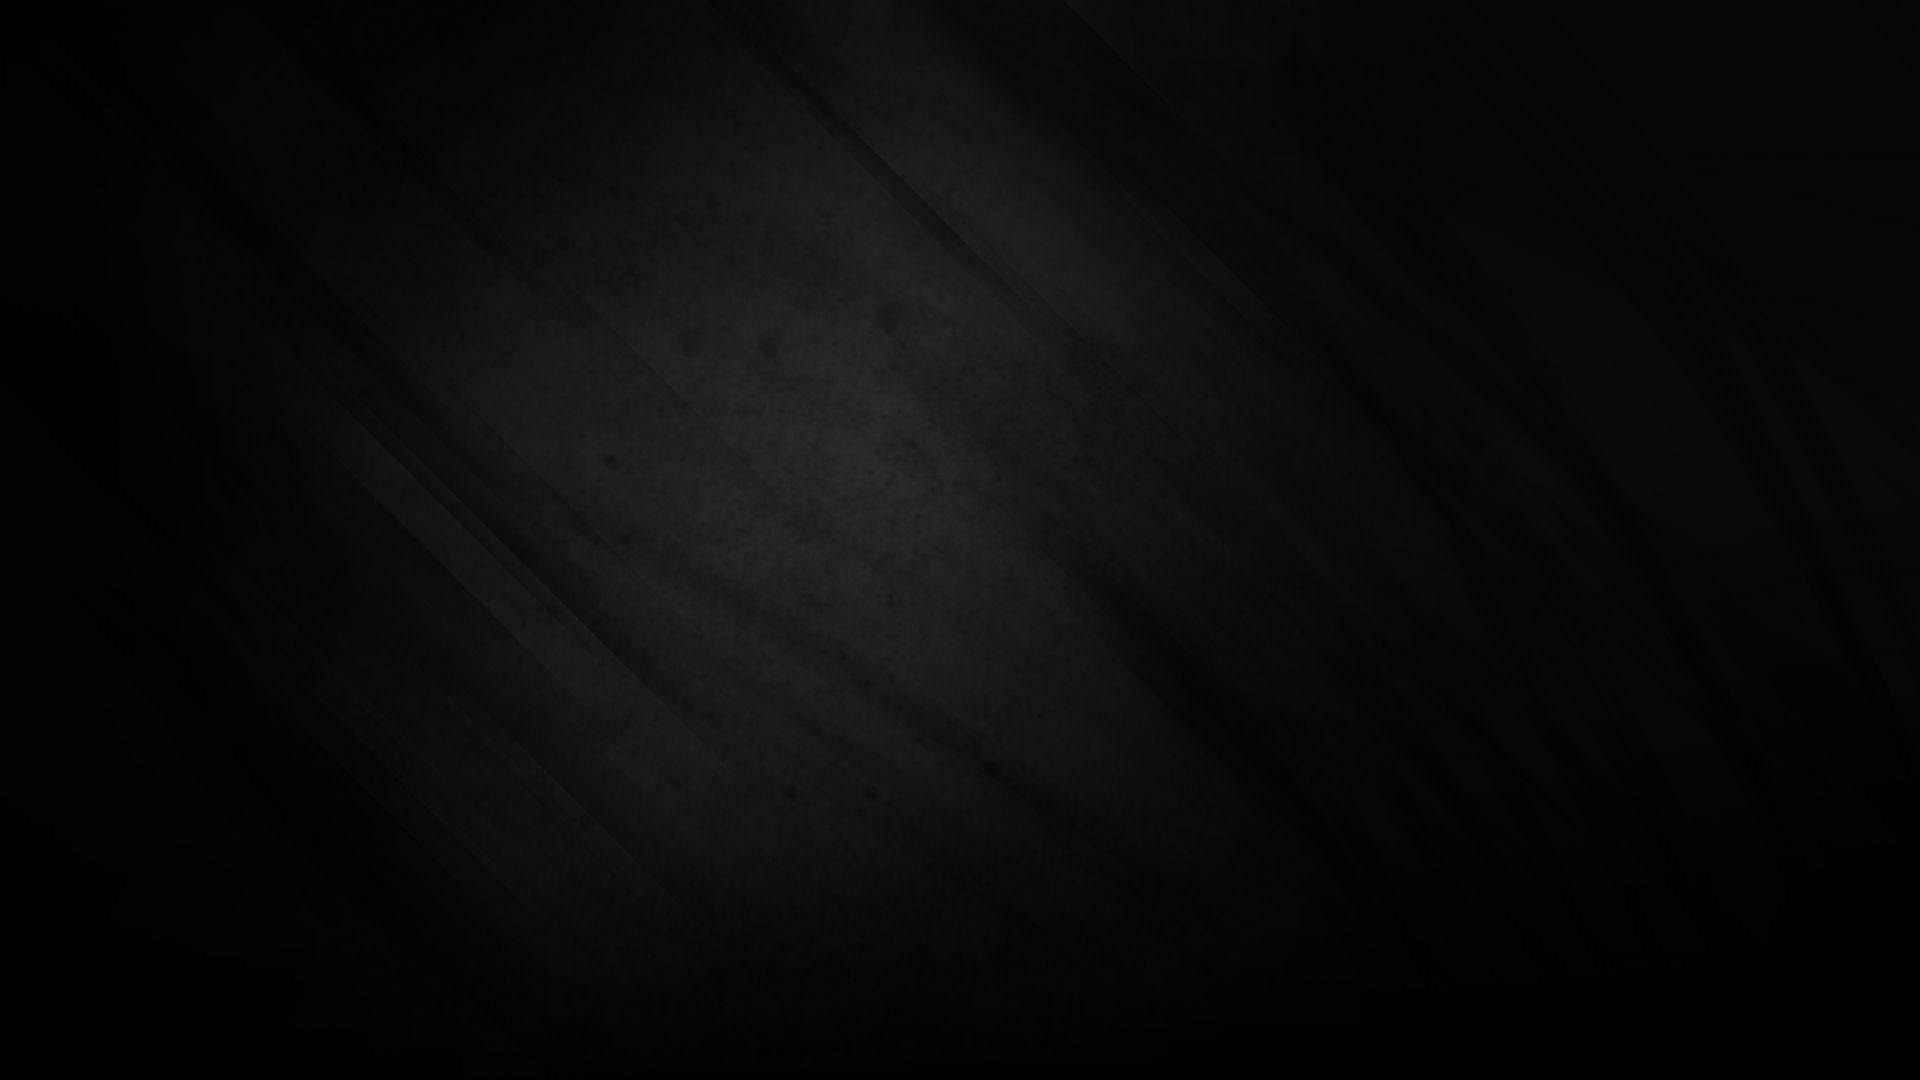 Pure Black With Fabric Texture Wallpaper